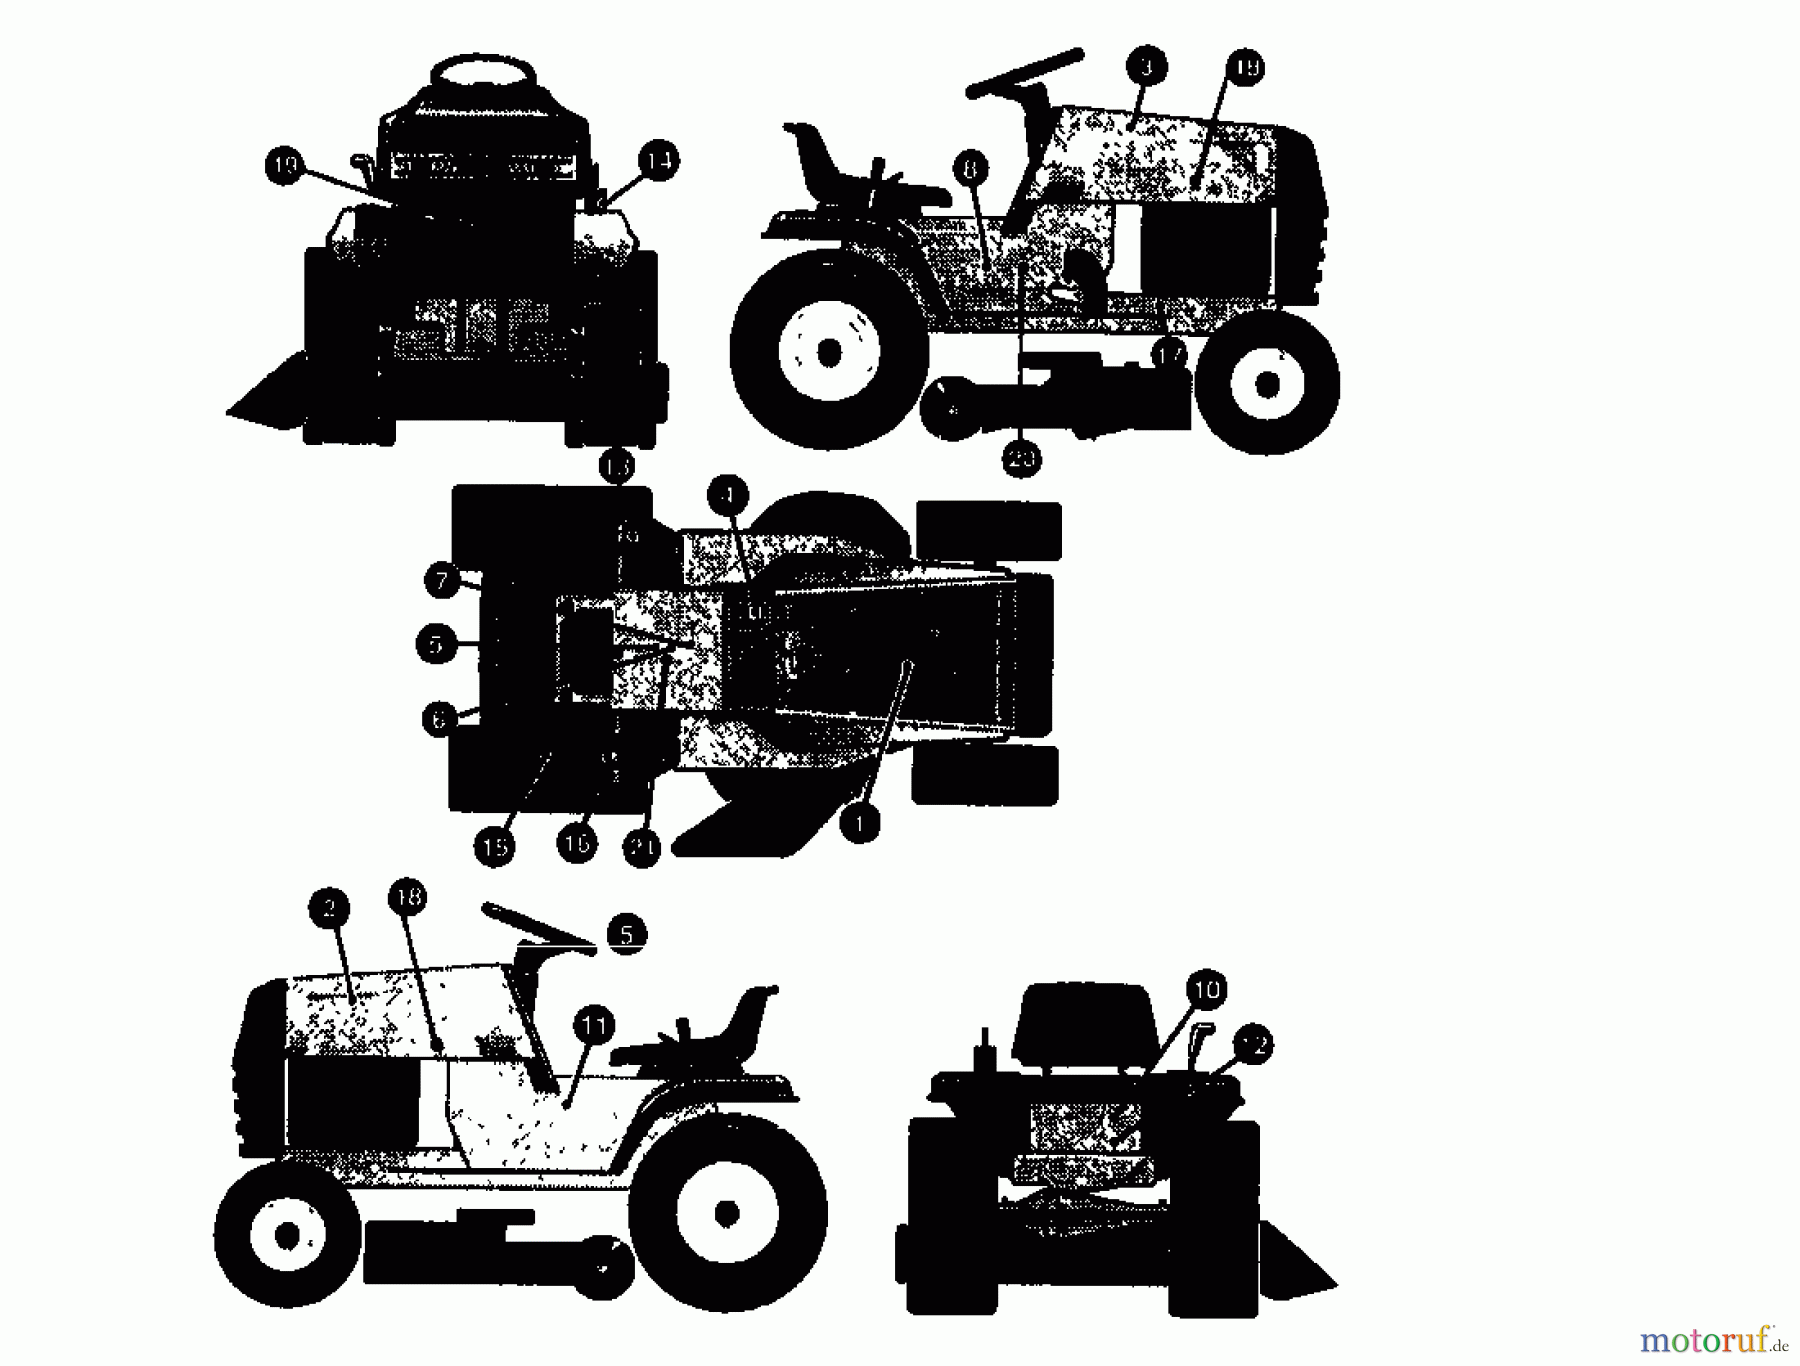  Gutbrod Lawn tractors RSB 80-10 04015.09  (1993) Decal